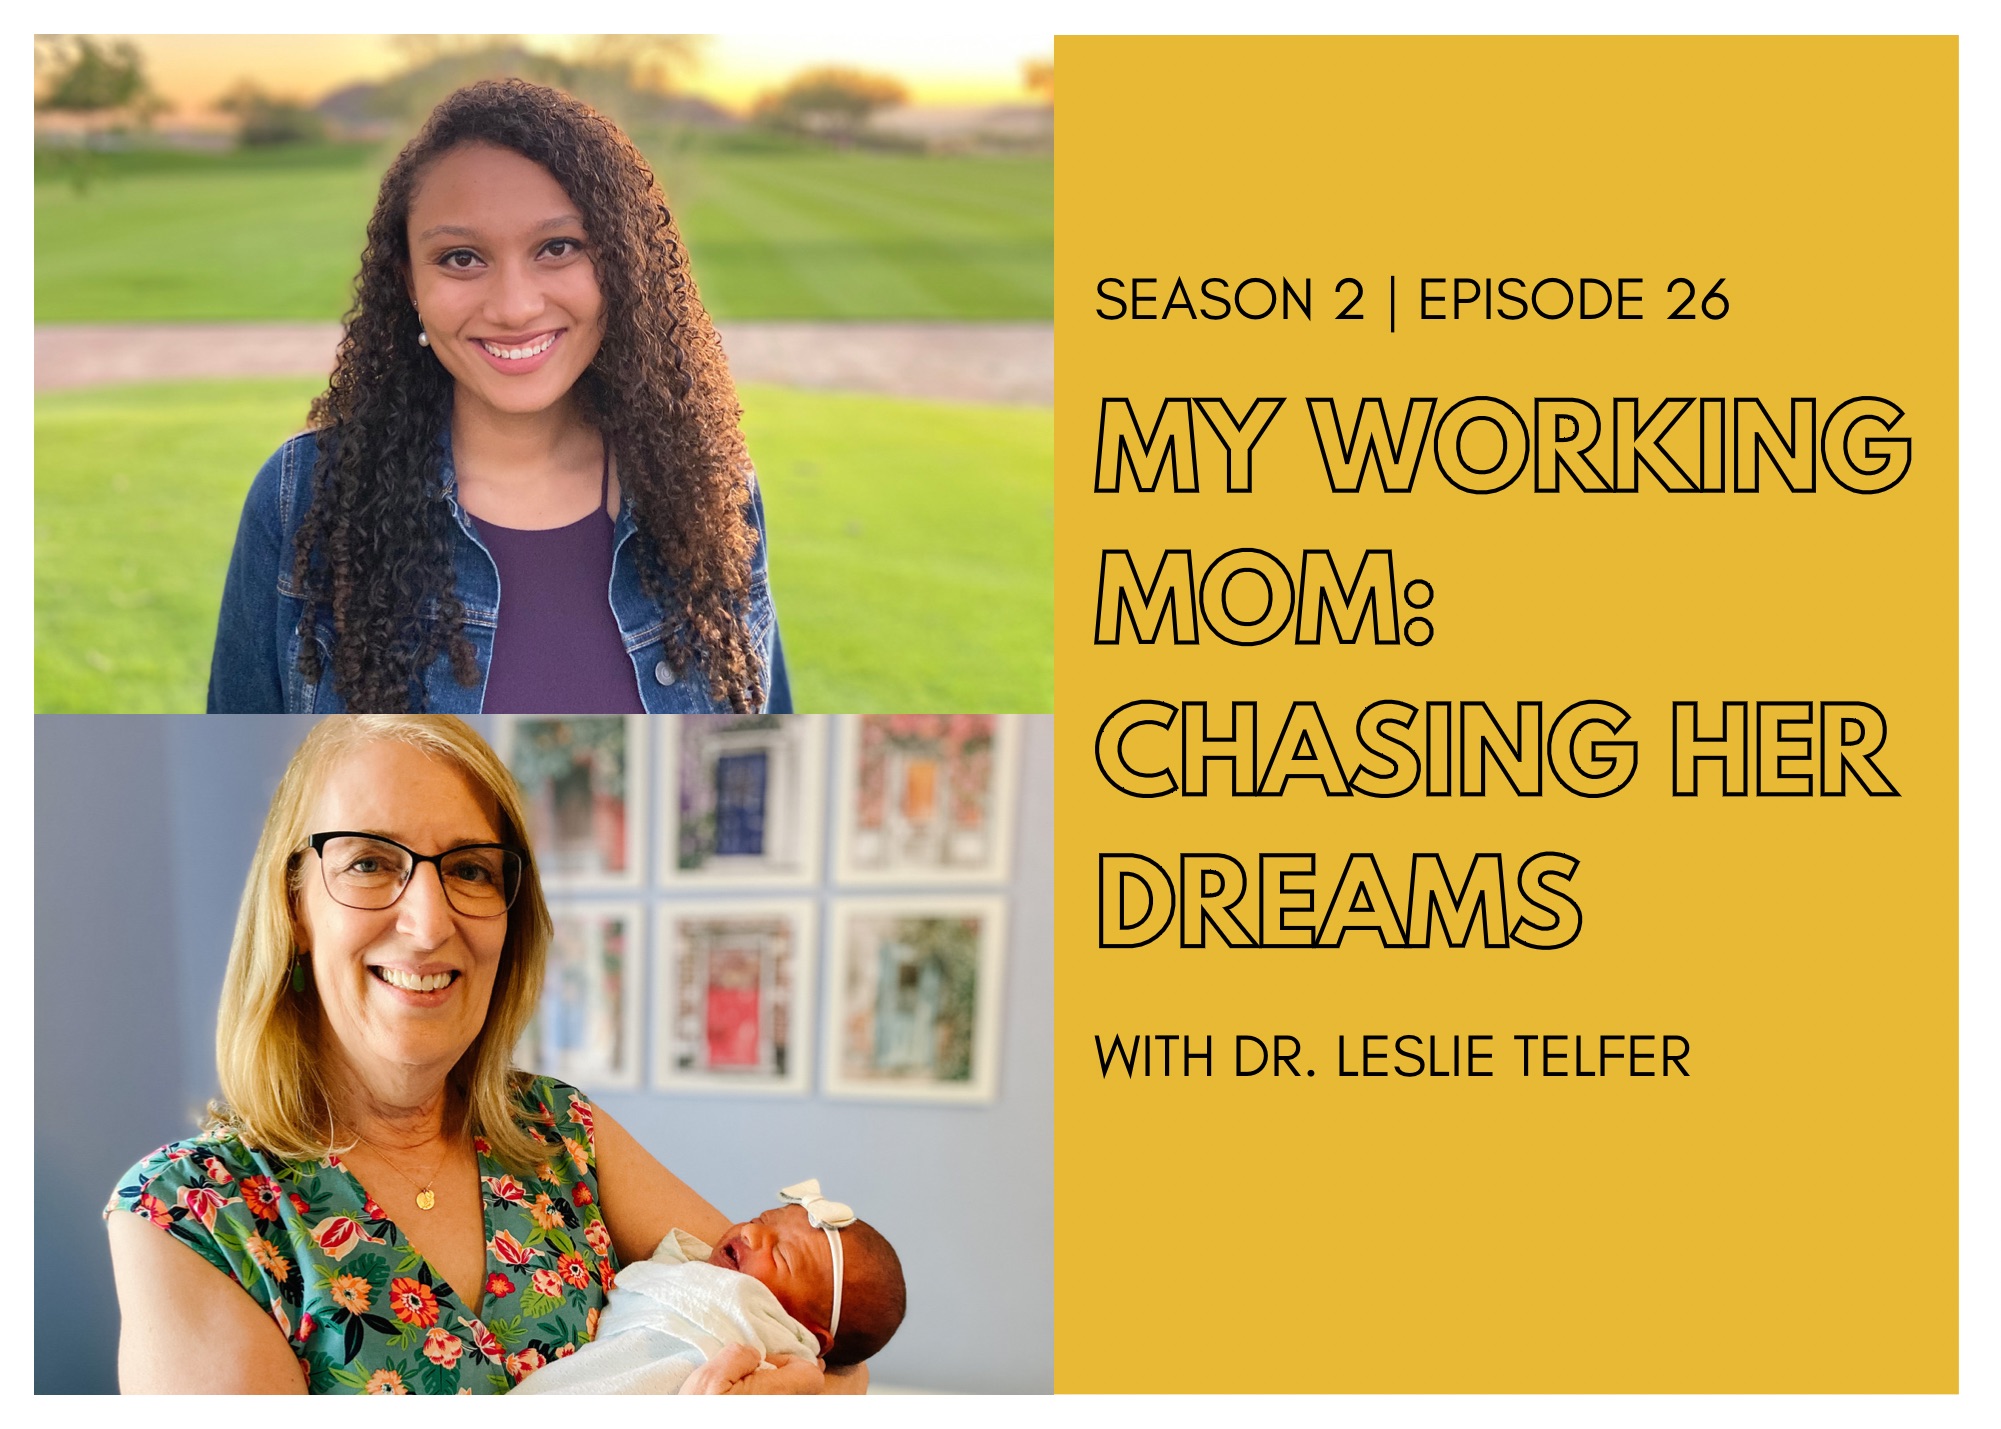 My Working Mom: Chasing Her Dreams